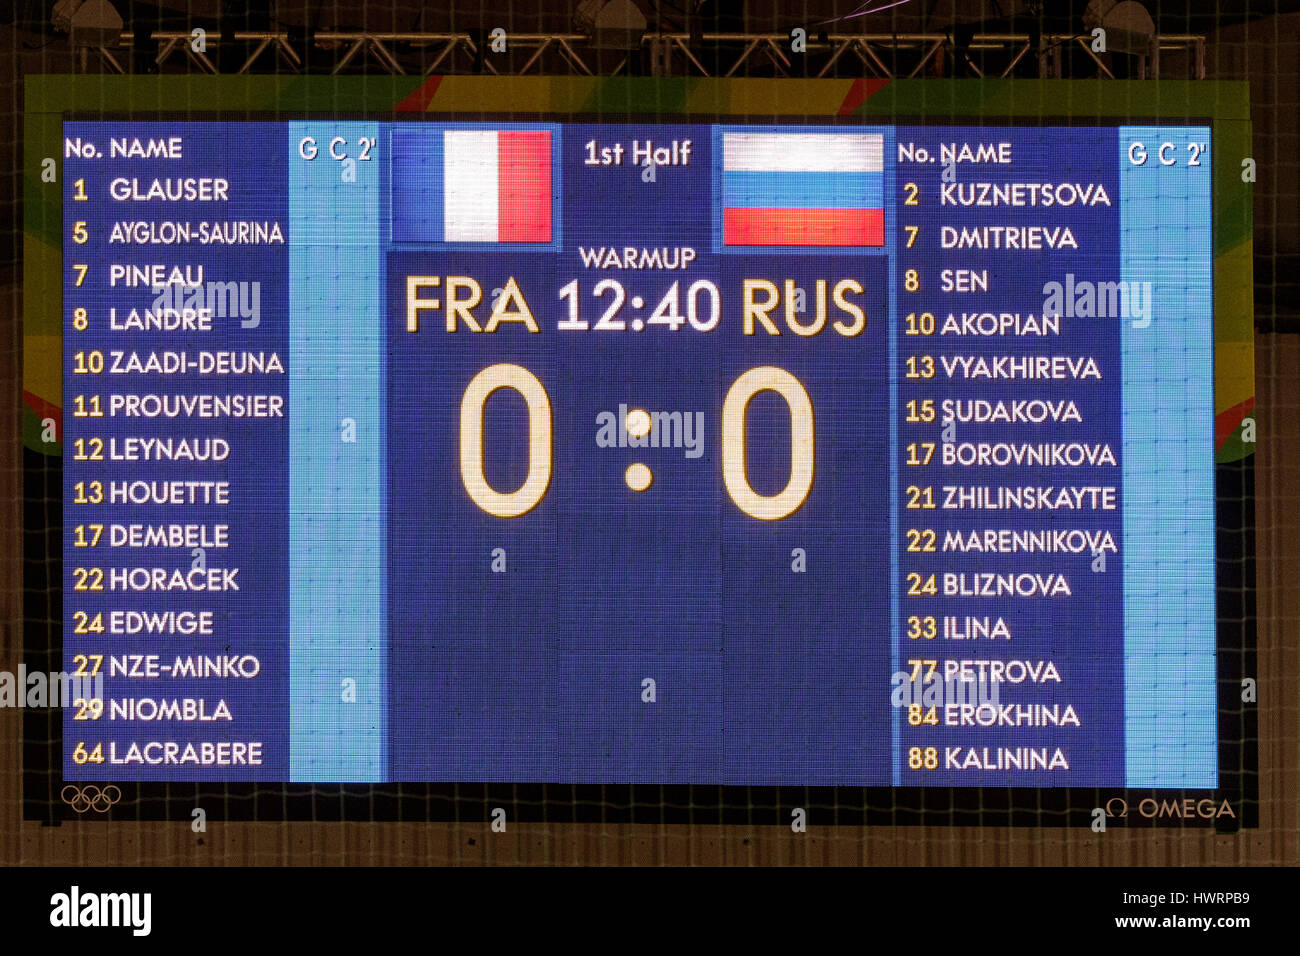 Rio de Janeiro, Brazil. 20 August 2016 Scoreboard for the women's handball gold medal match Russia vs. France at the 2016 Olympic Summer Games. ©Paul  Stock Photo